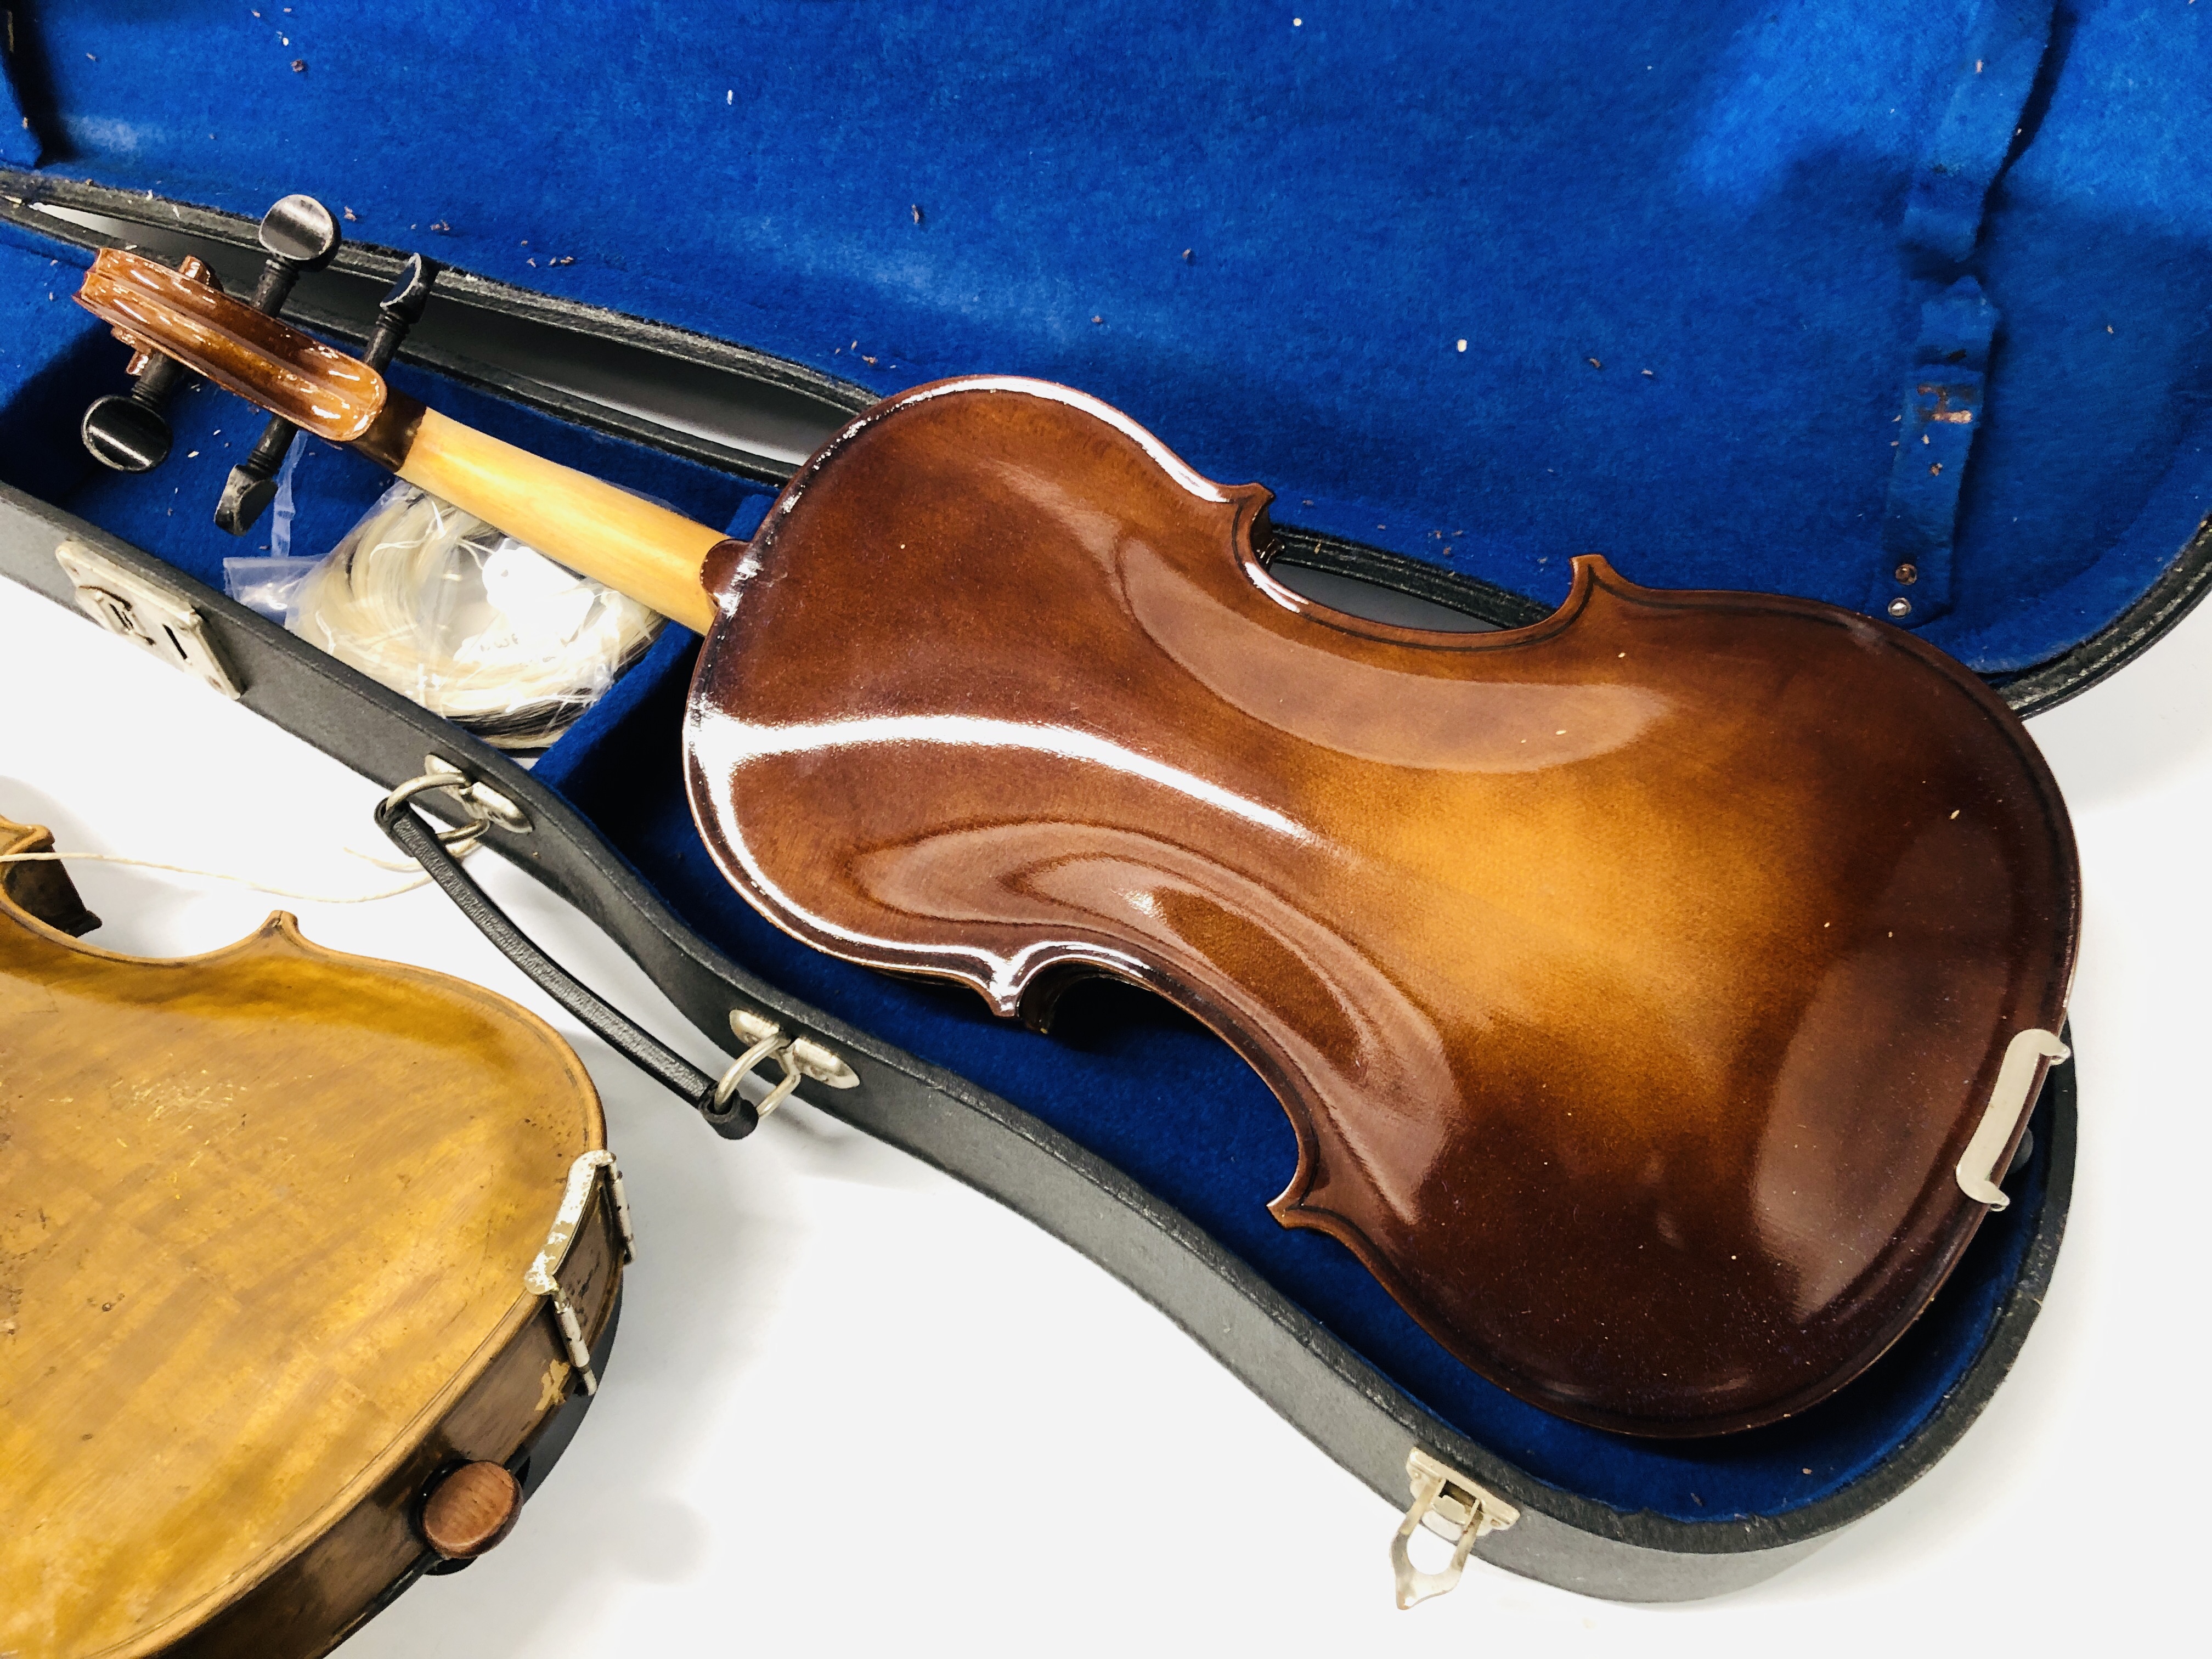 4 X VINTAGE VIOLINS AND 2 WOODEN CASES, VARIOUS BOWS (NO STRINGS) FOR RESTORATION. - Image 12 of 20